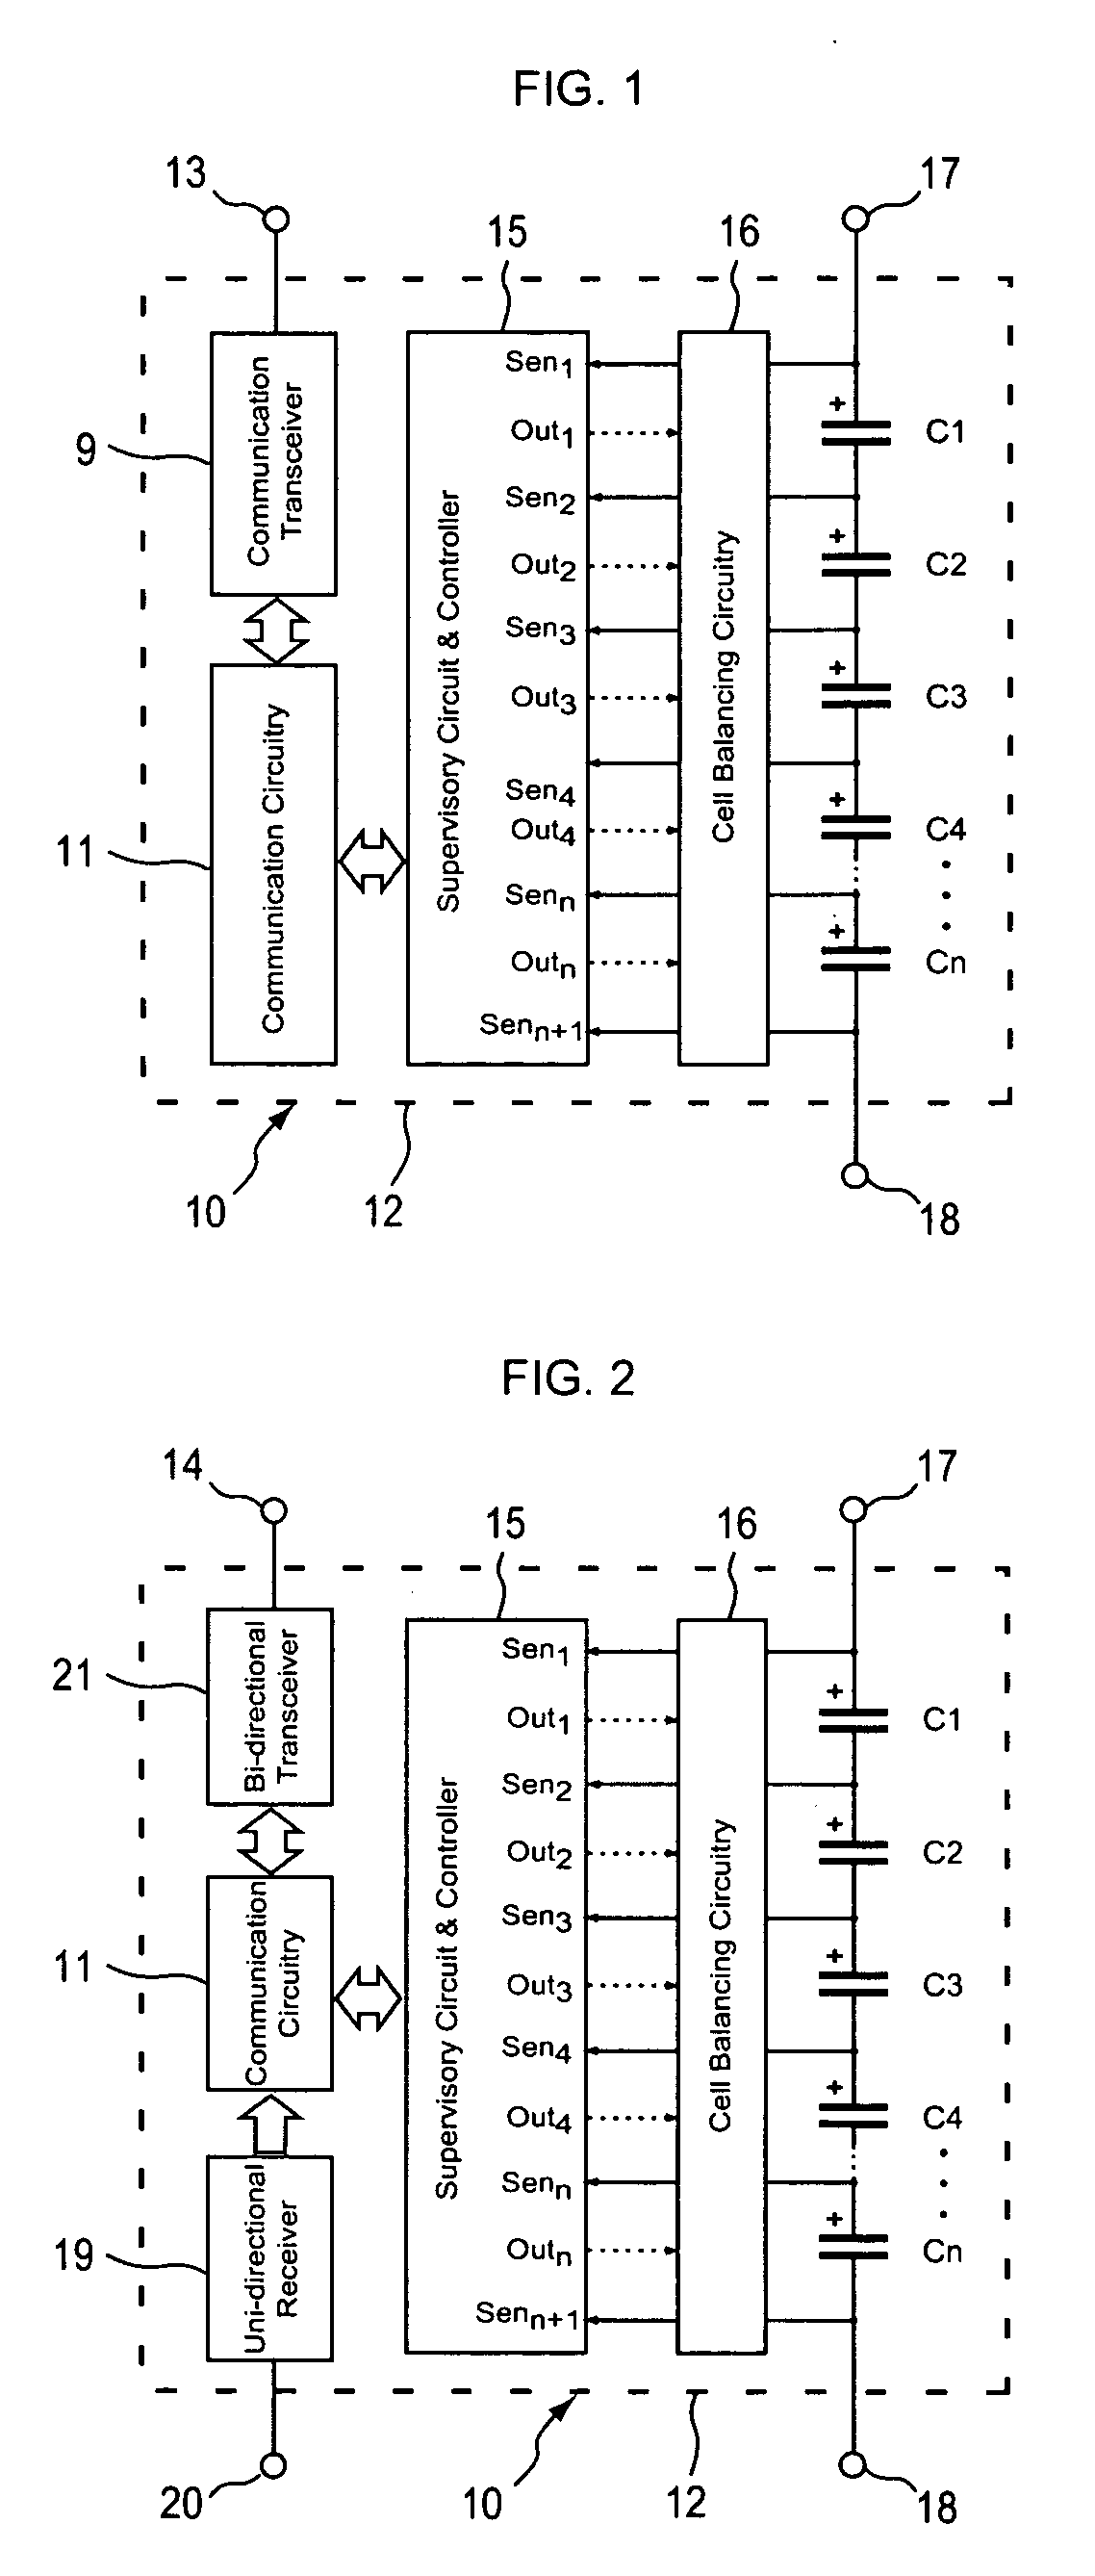 Distributed networks of electric double layer capacitor supervisory controllers and networks thereof